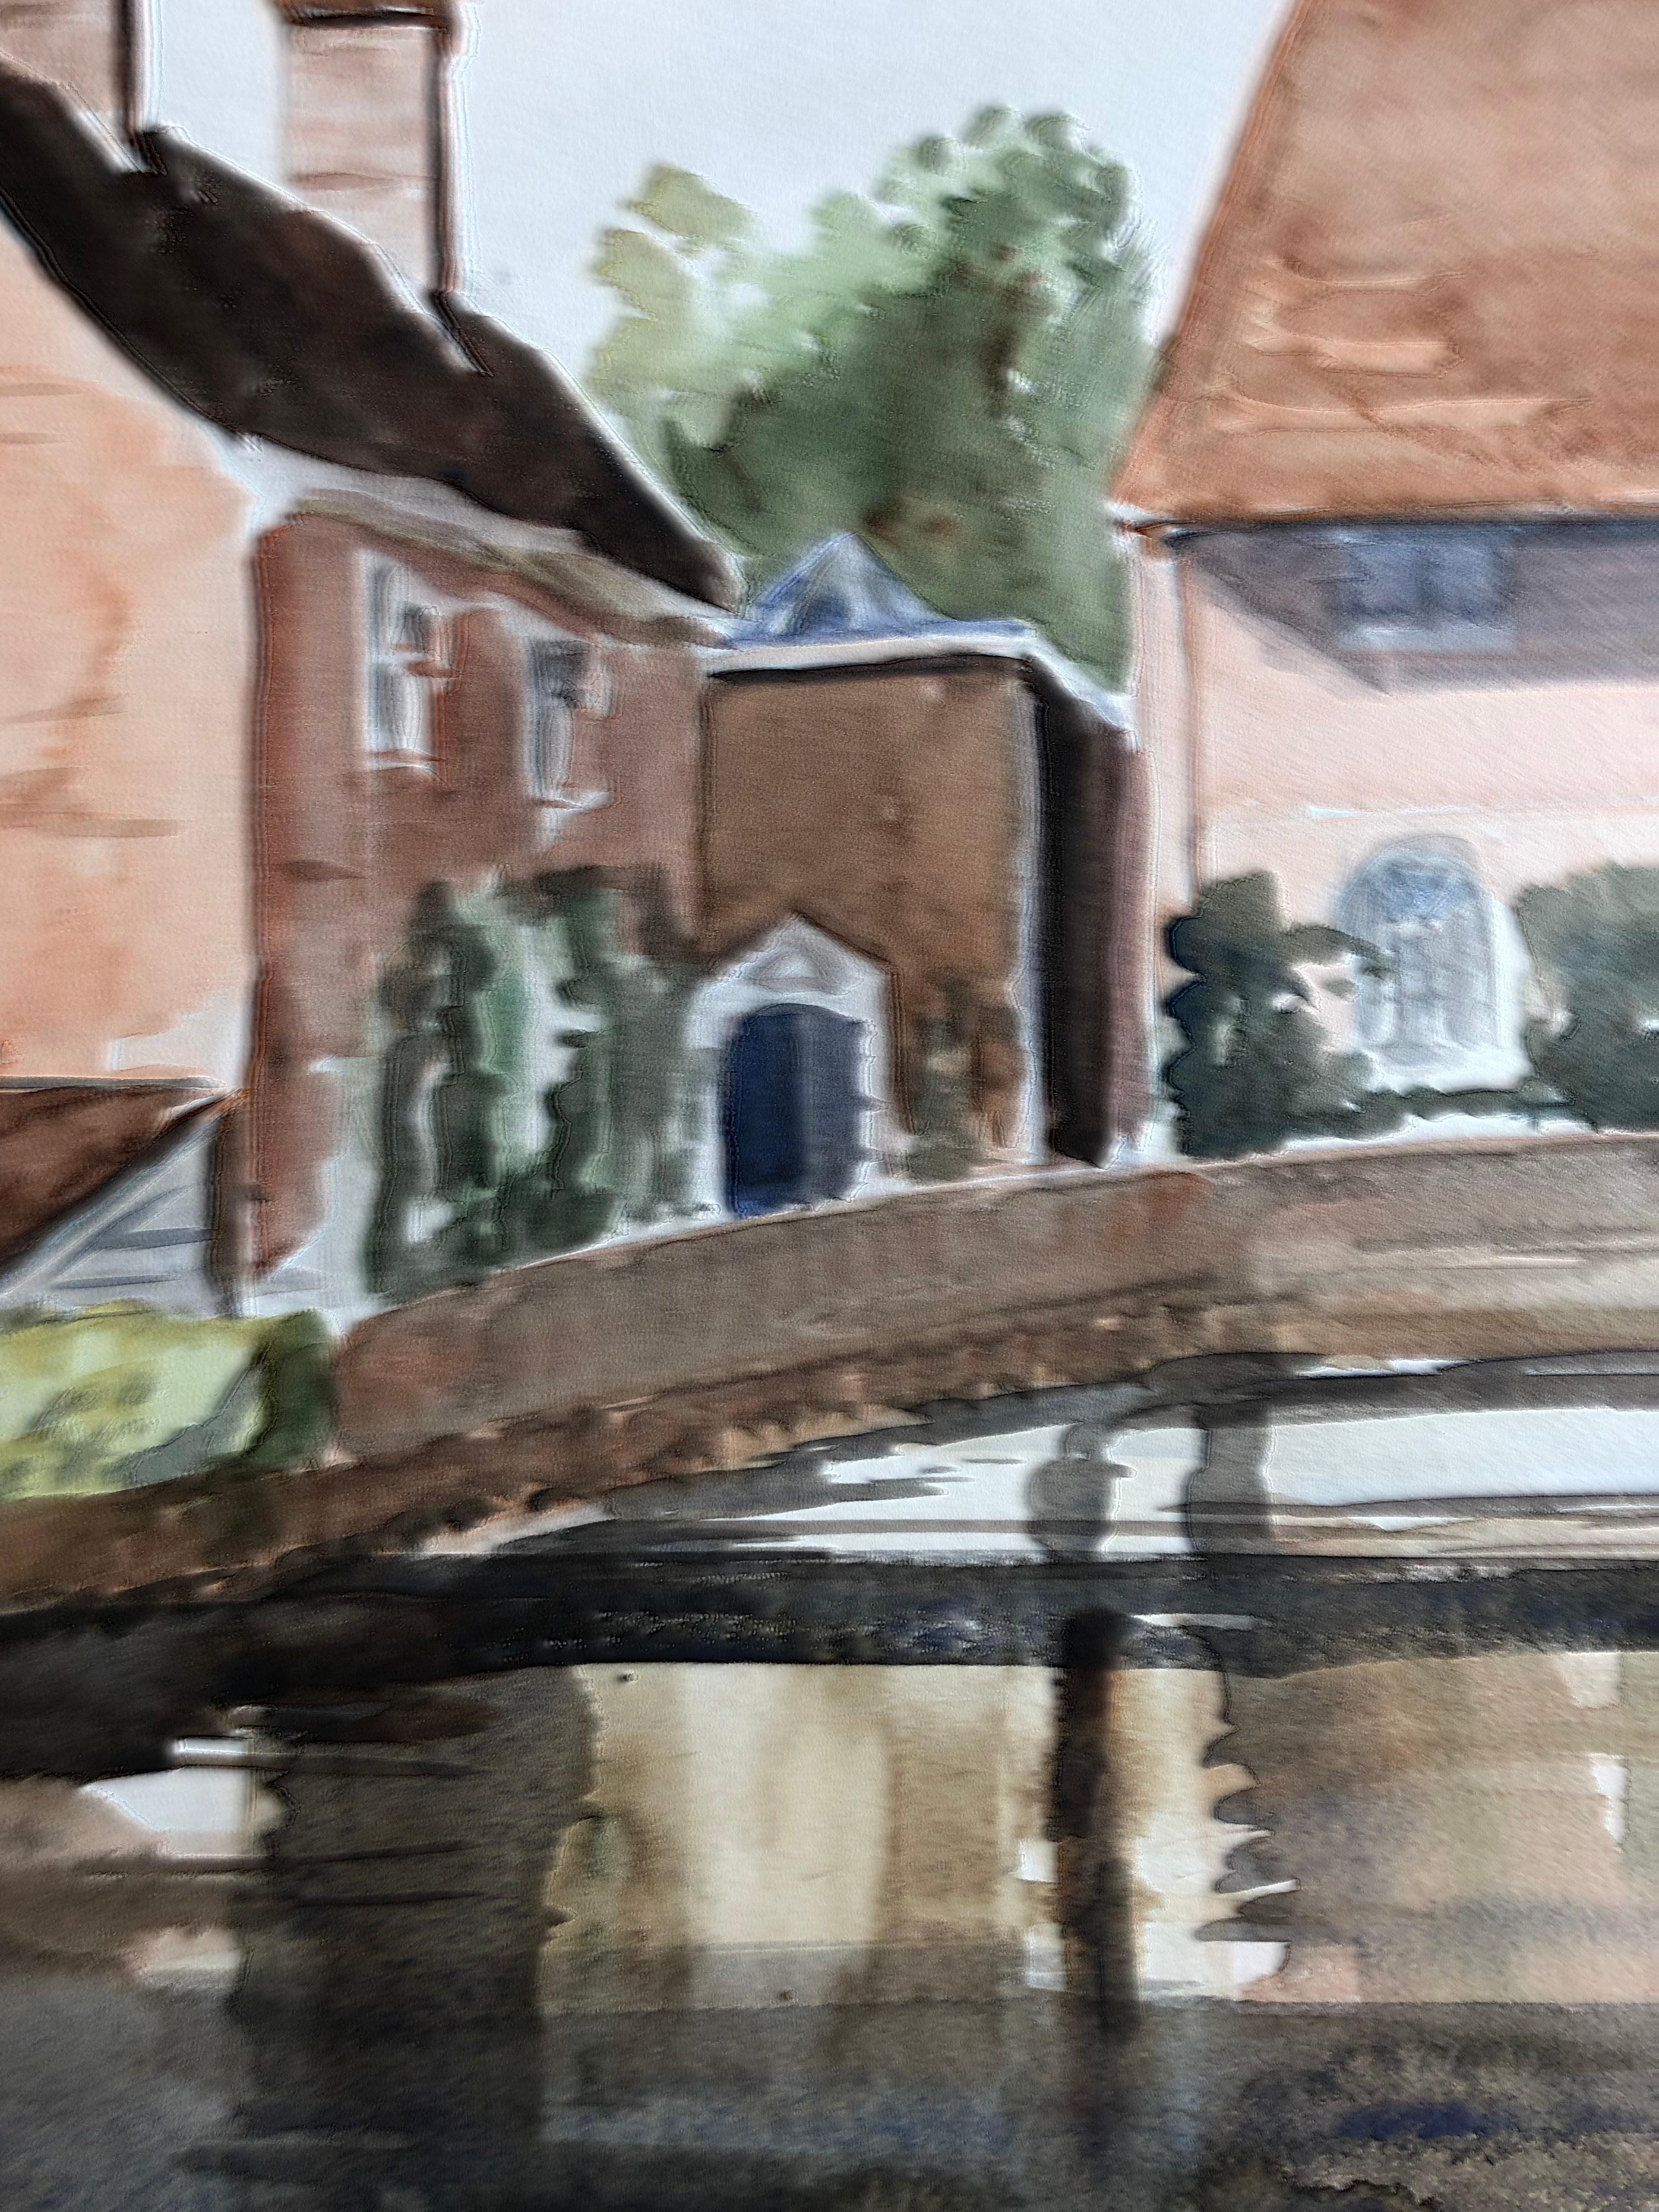 Village Bridge scene
by Ronald Birch, British circa 1970's
watercolour on art paper, unframed
overall paper measures: 14.75 x 19 inches

*FREE SHIPPING ON THIS PAINTING*: AMERICAN, EUROPE & UNITED KINGDOM

Lovely original watercolour painting